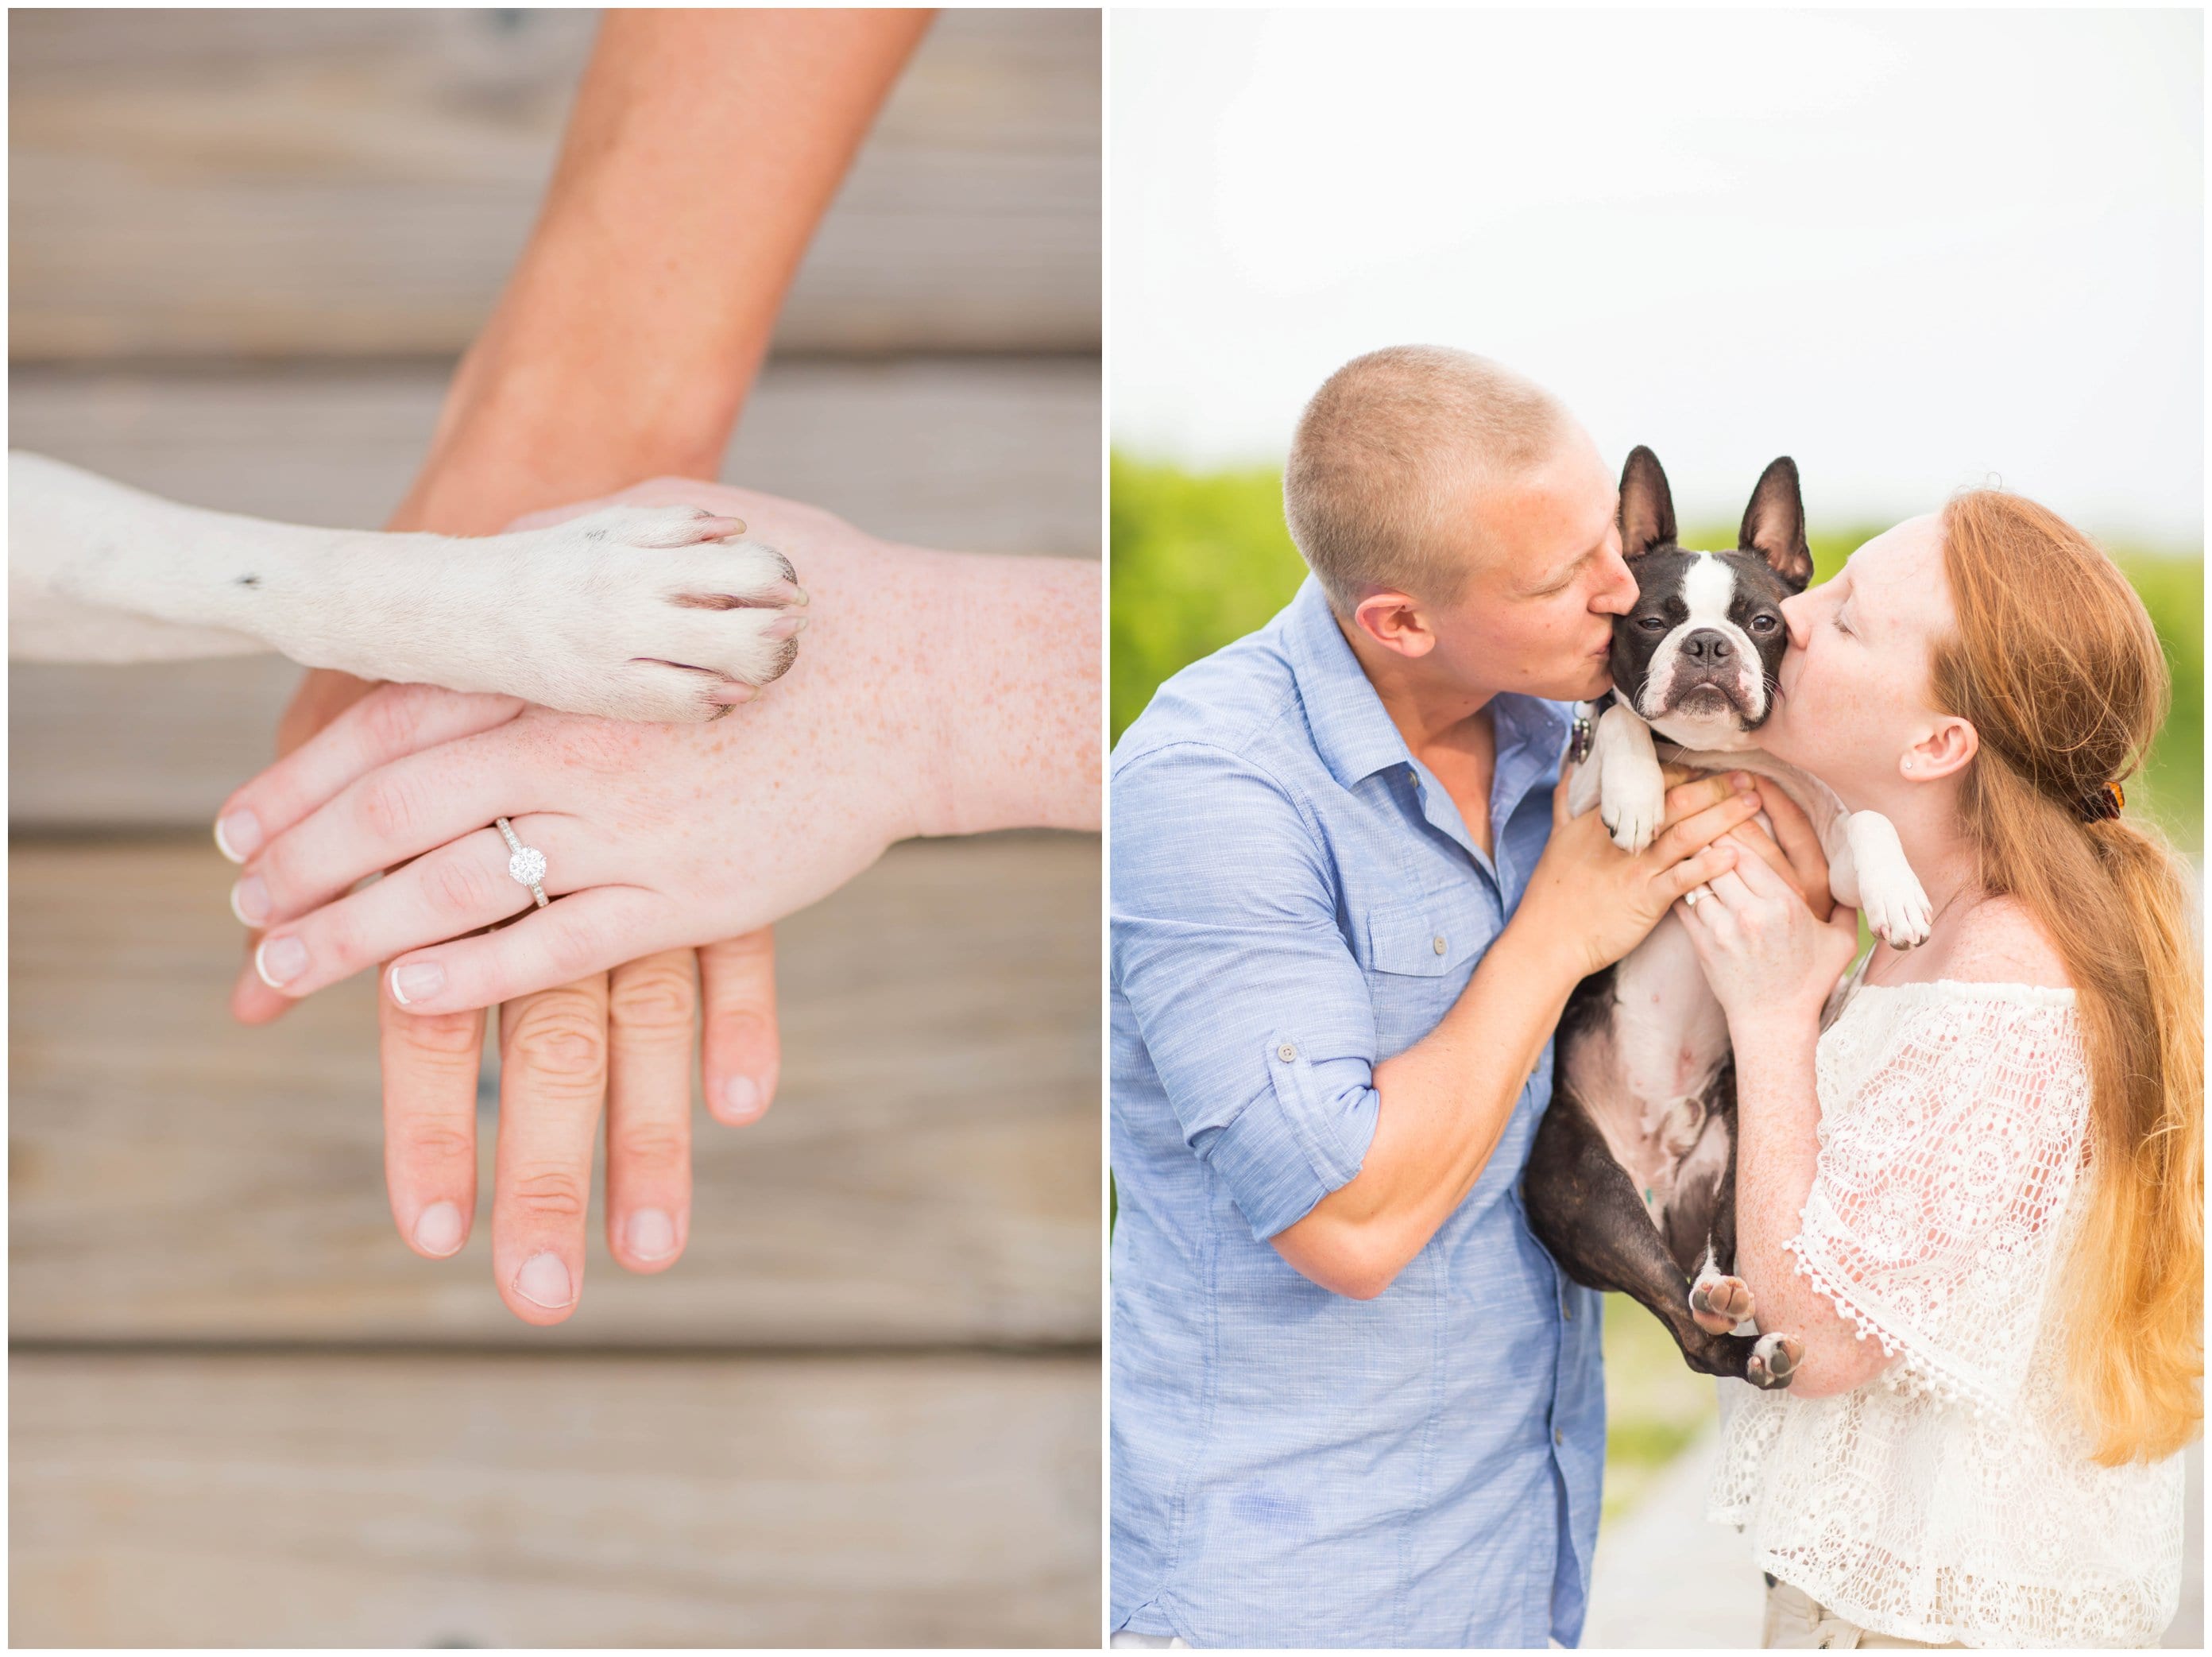 I love that Katie requested a special "all hands/paws in" shot. It was perfect!